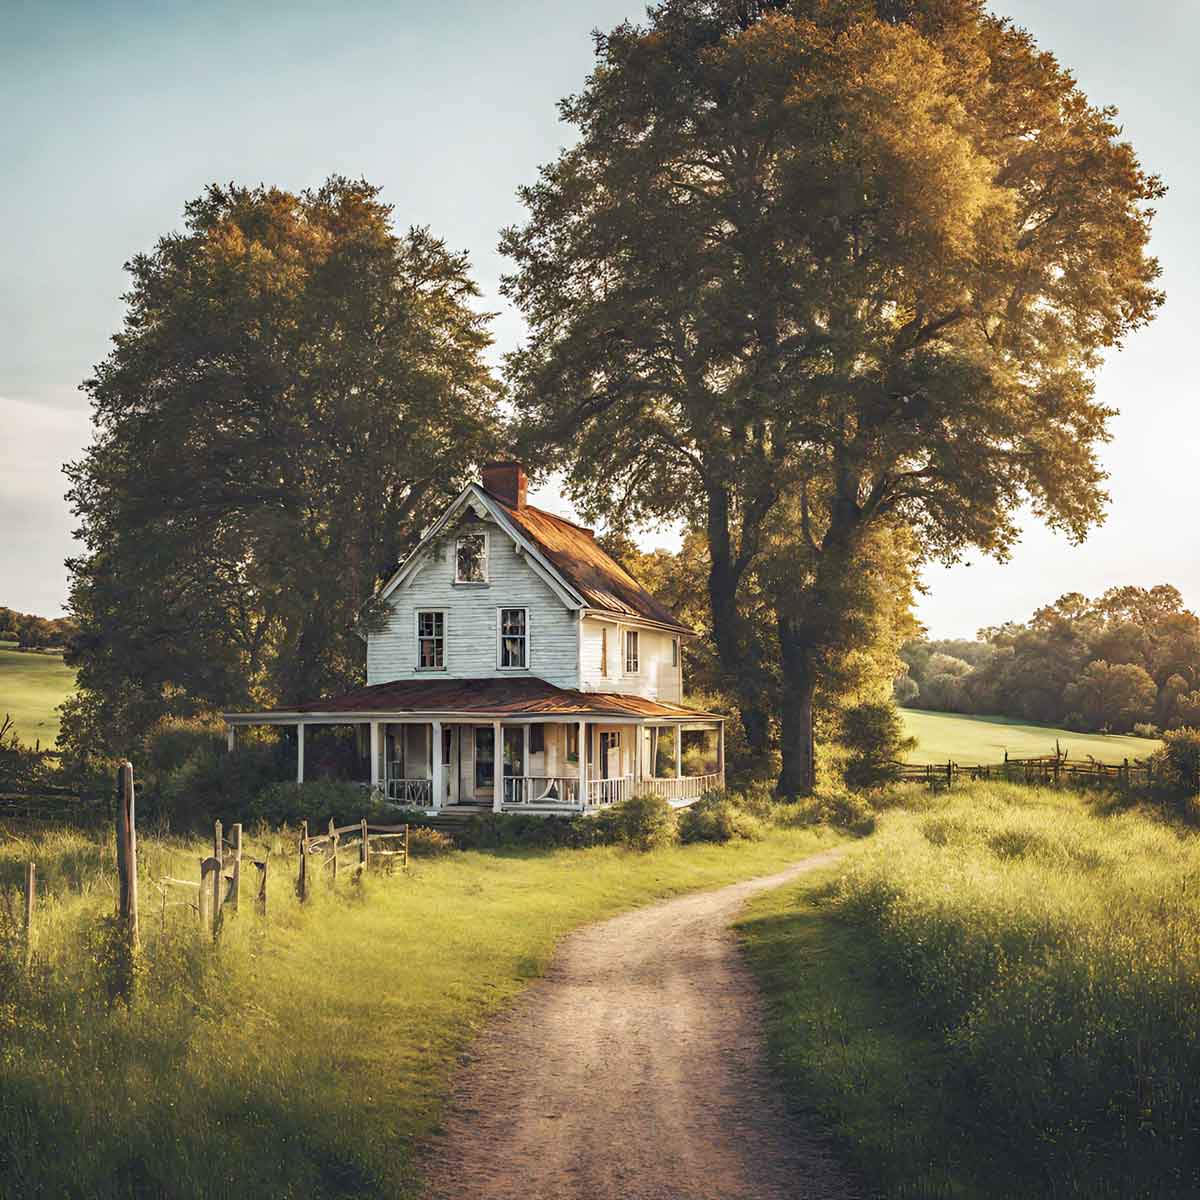 A country house in the middle of nowhere with trees